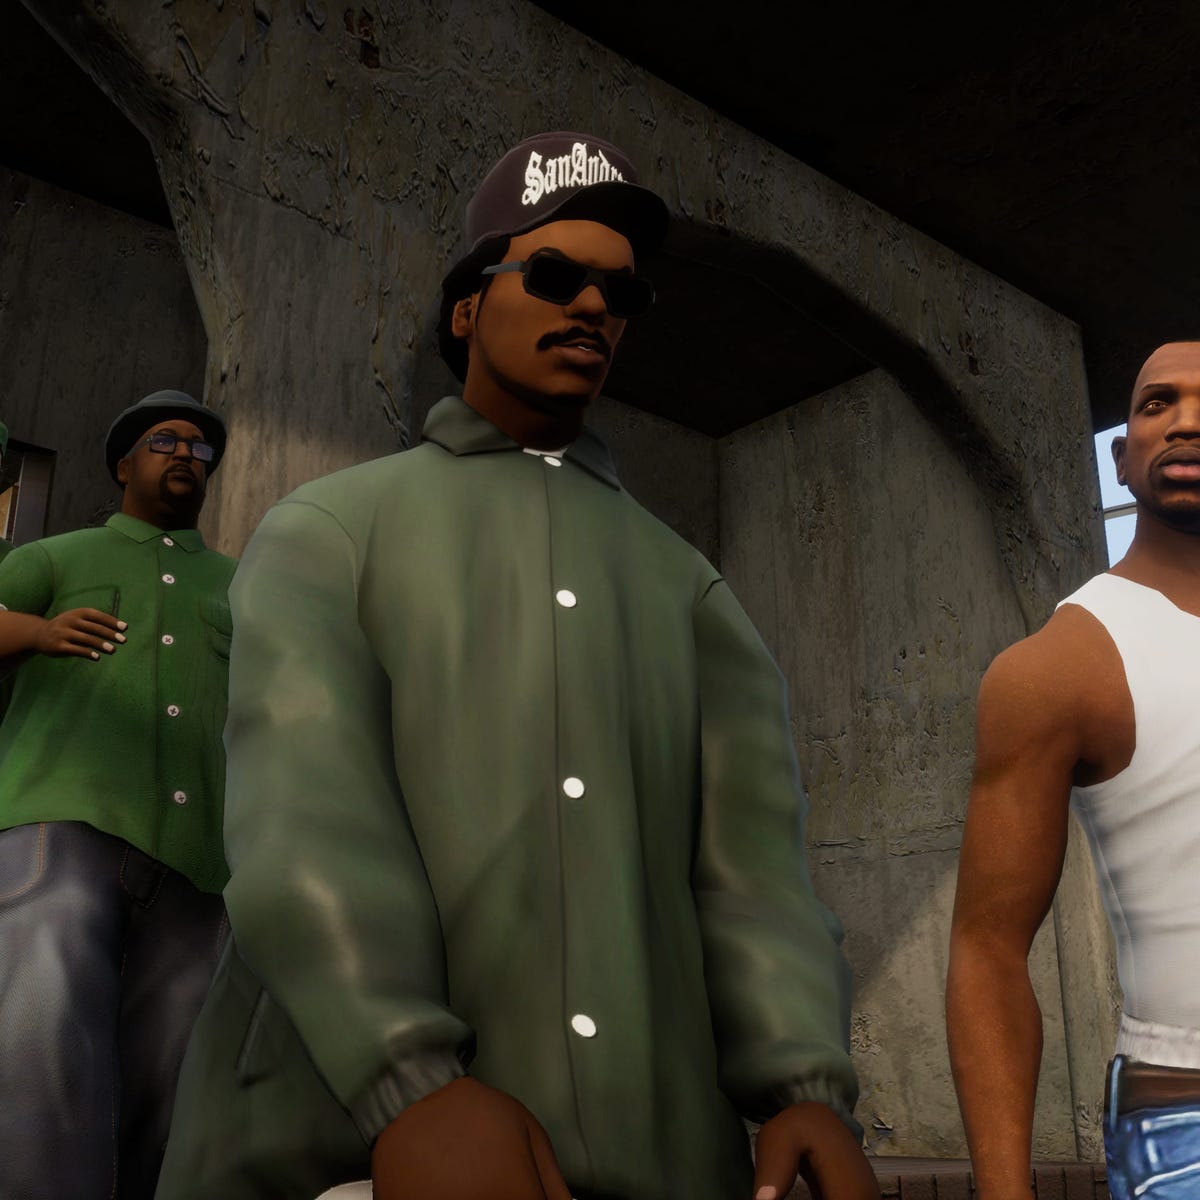 Rockstar Games apologizes for GTA Trilogy mess. Here's what you should know  - CNET